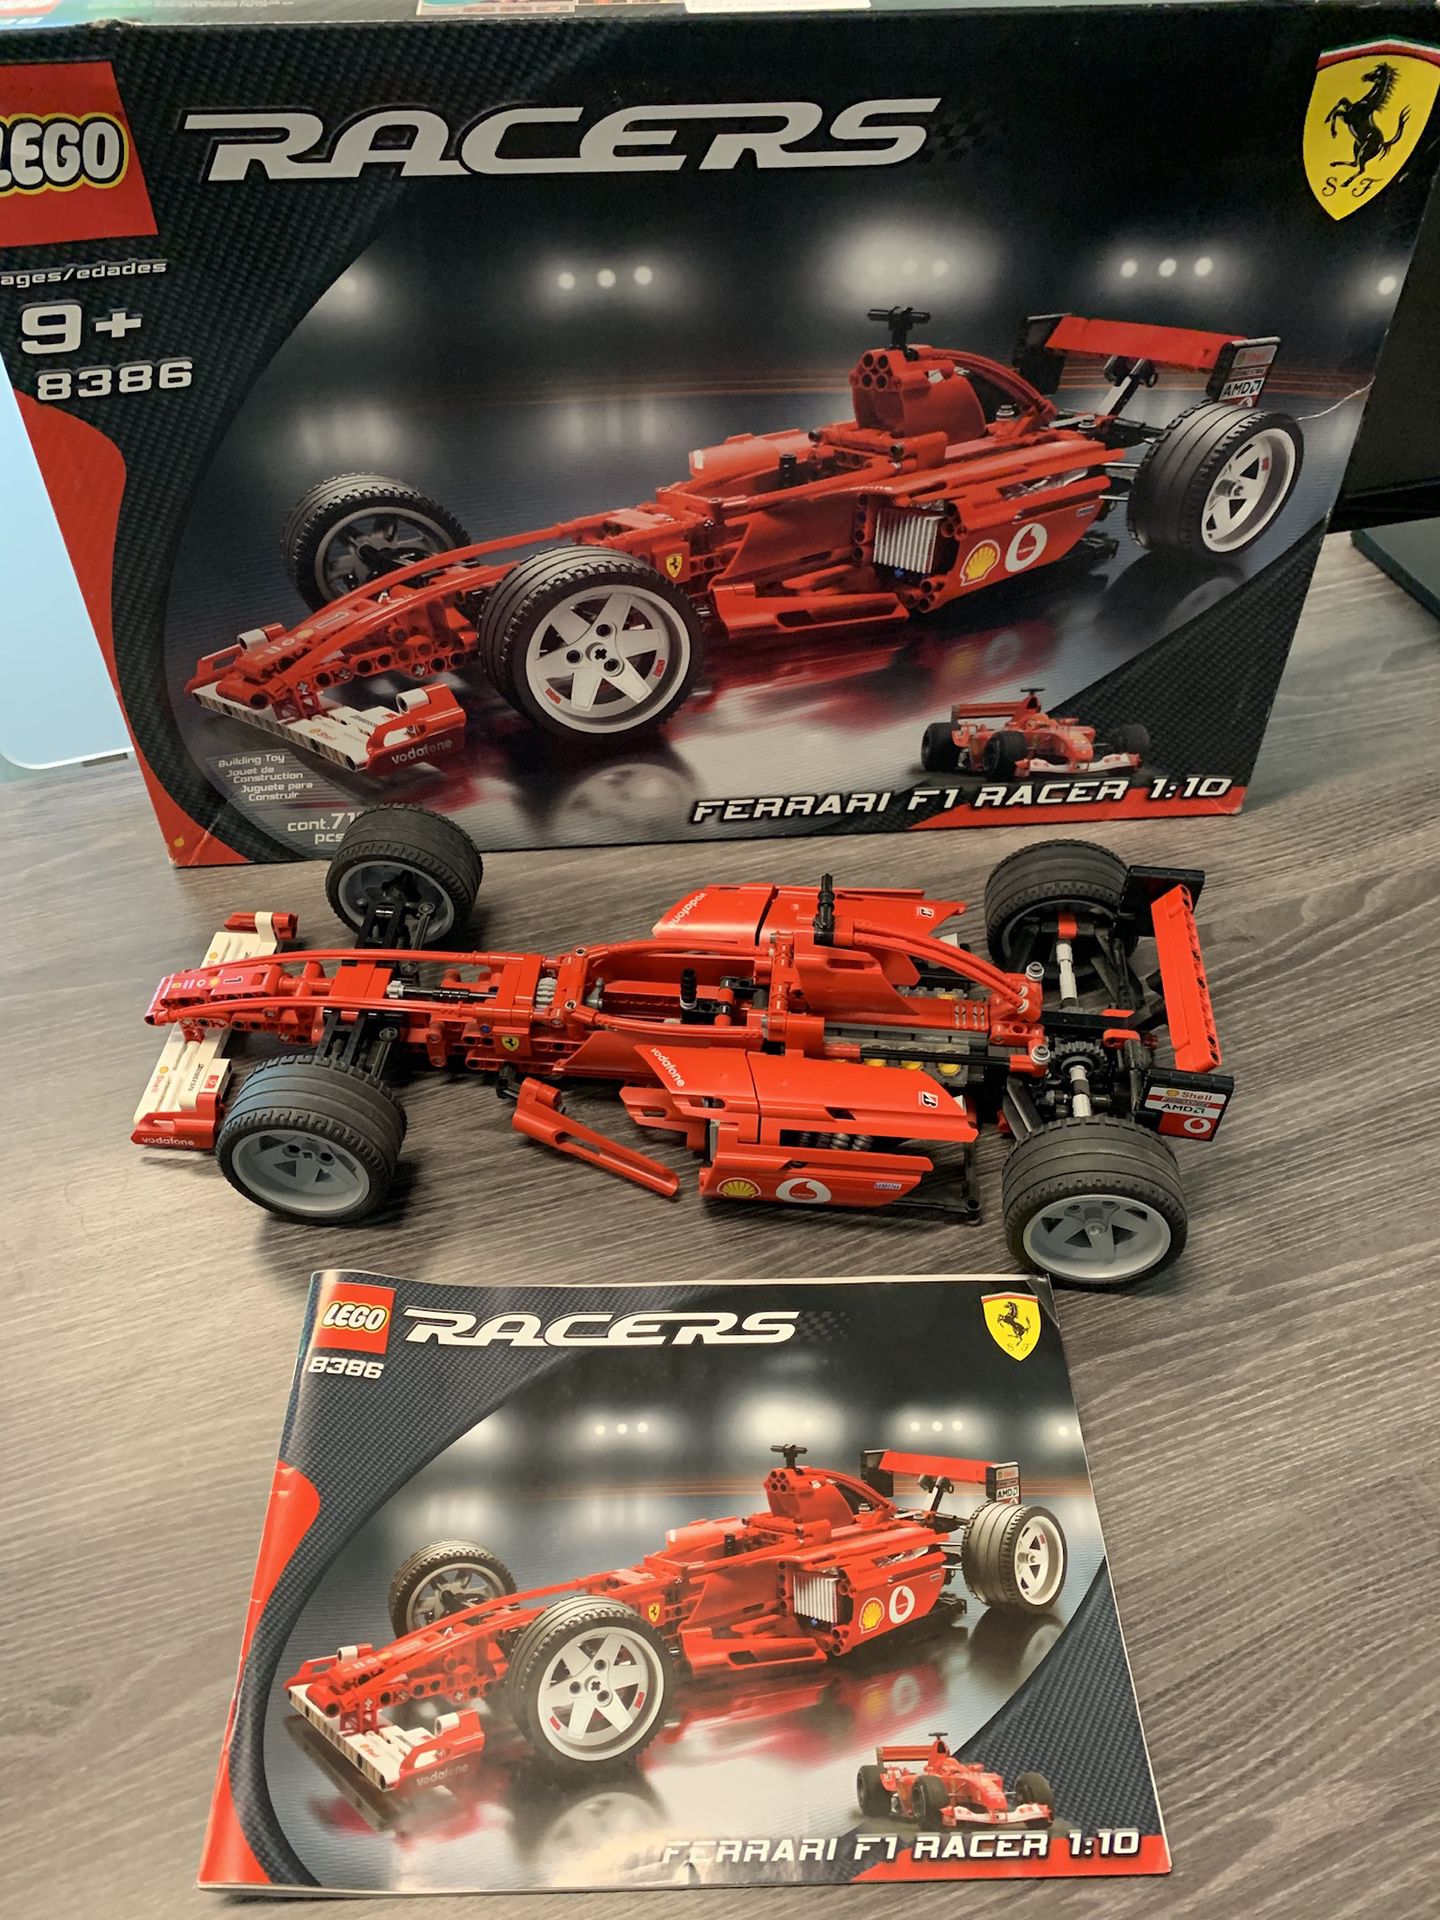 Collectible Ferrari LEGO F1 Racer 8386 1:10 scale 100% Complete with original box and instructions booklet